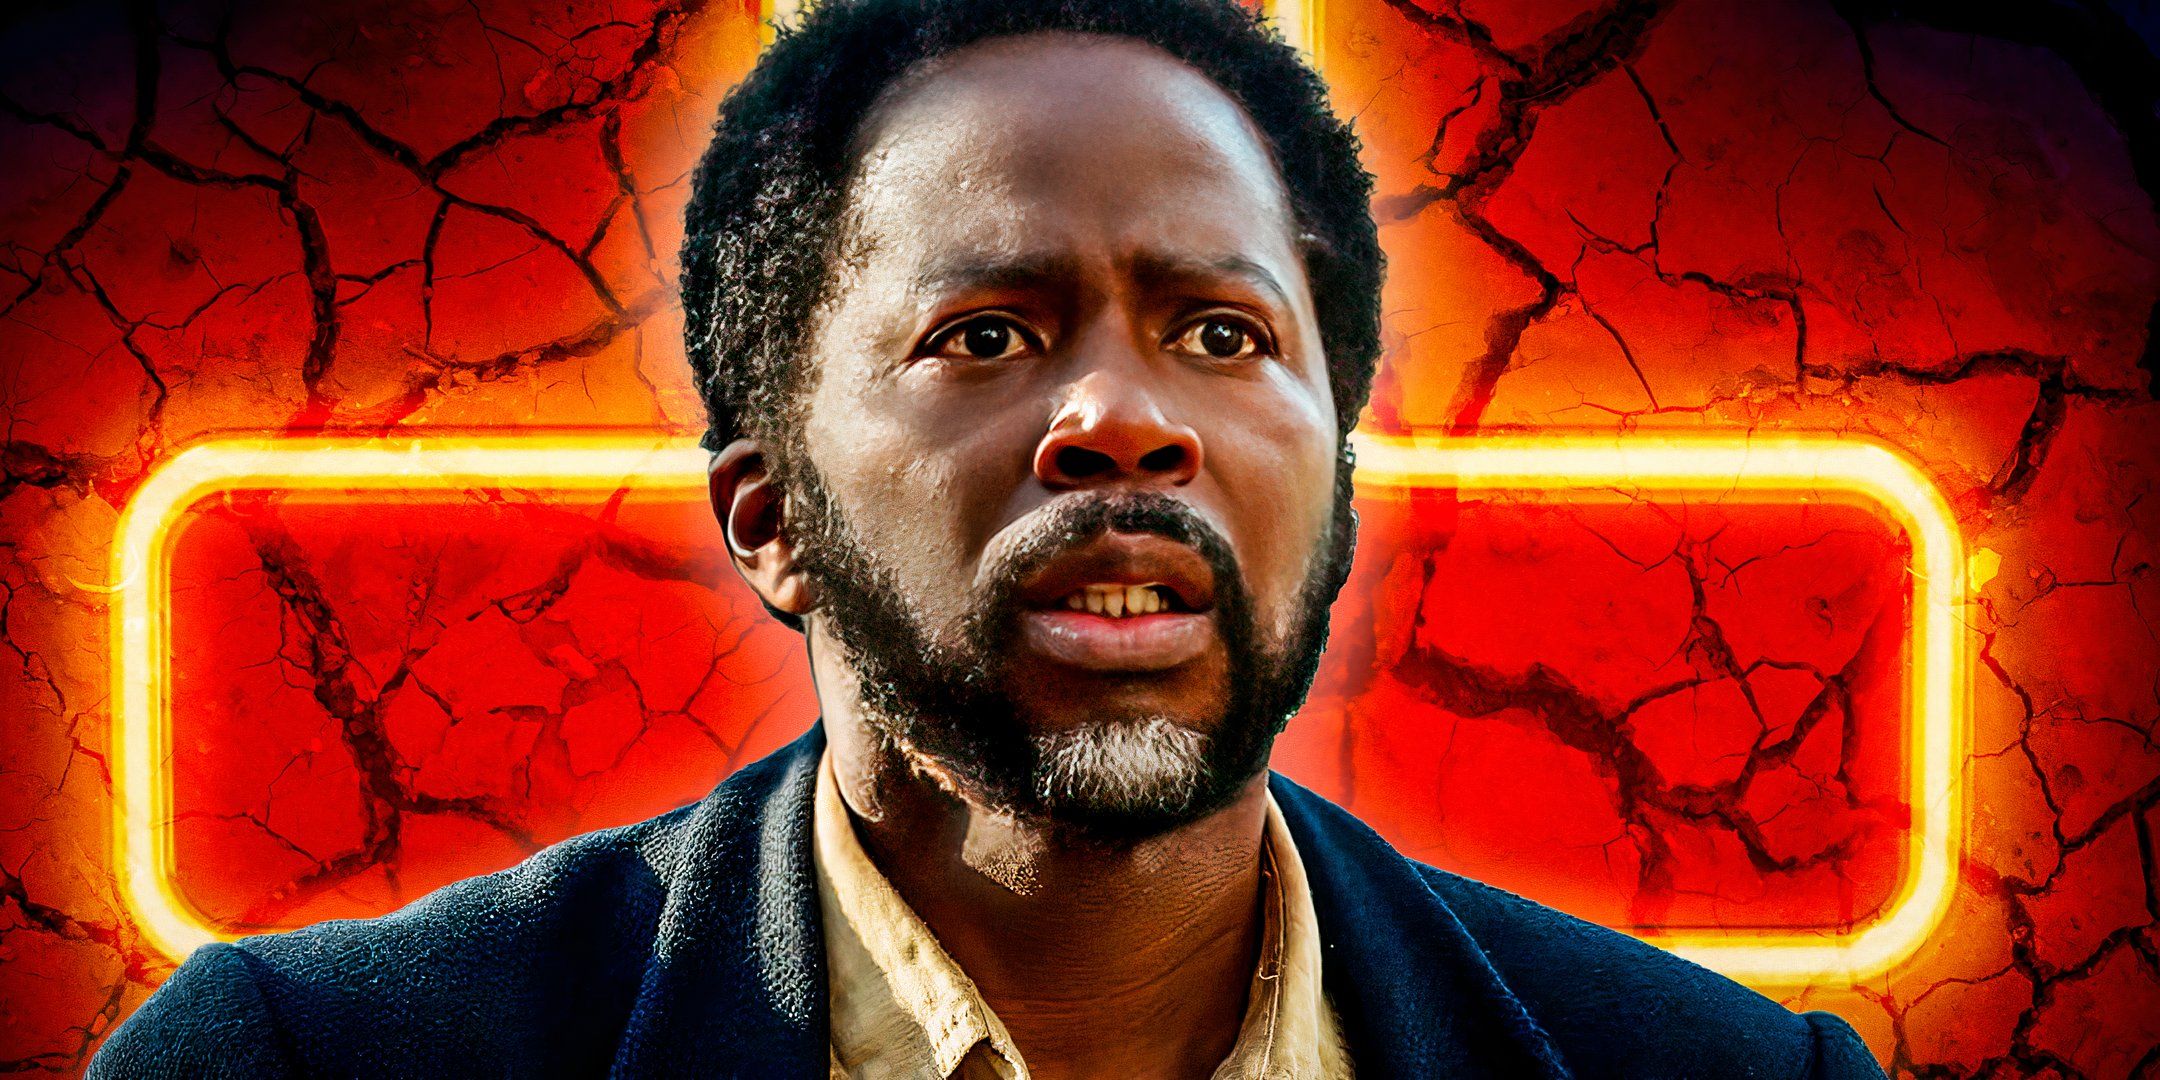 Harold Perrineau as Boyd Stevens in From TV Show with red background